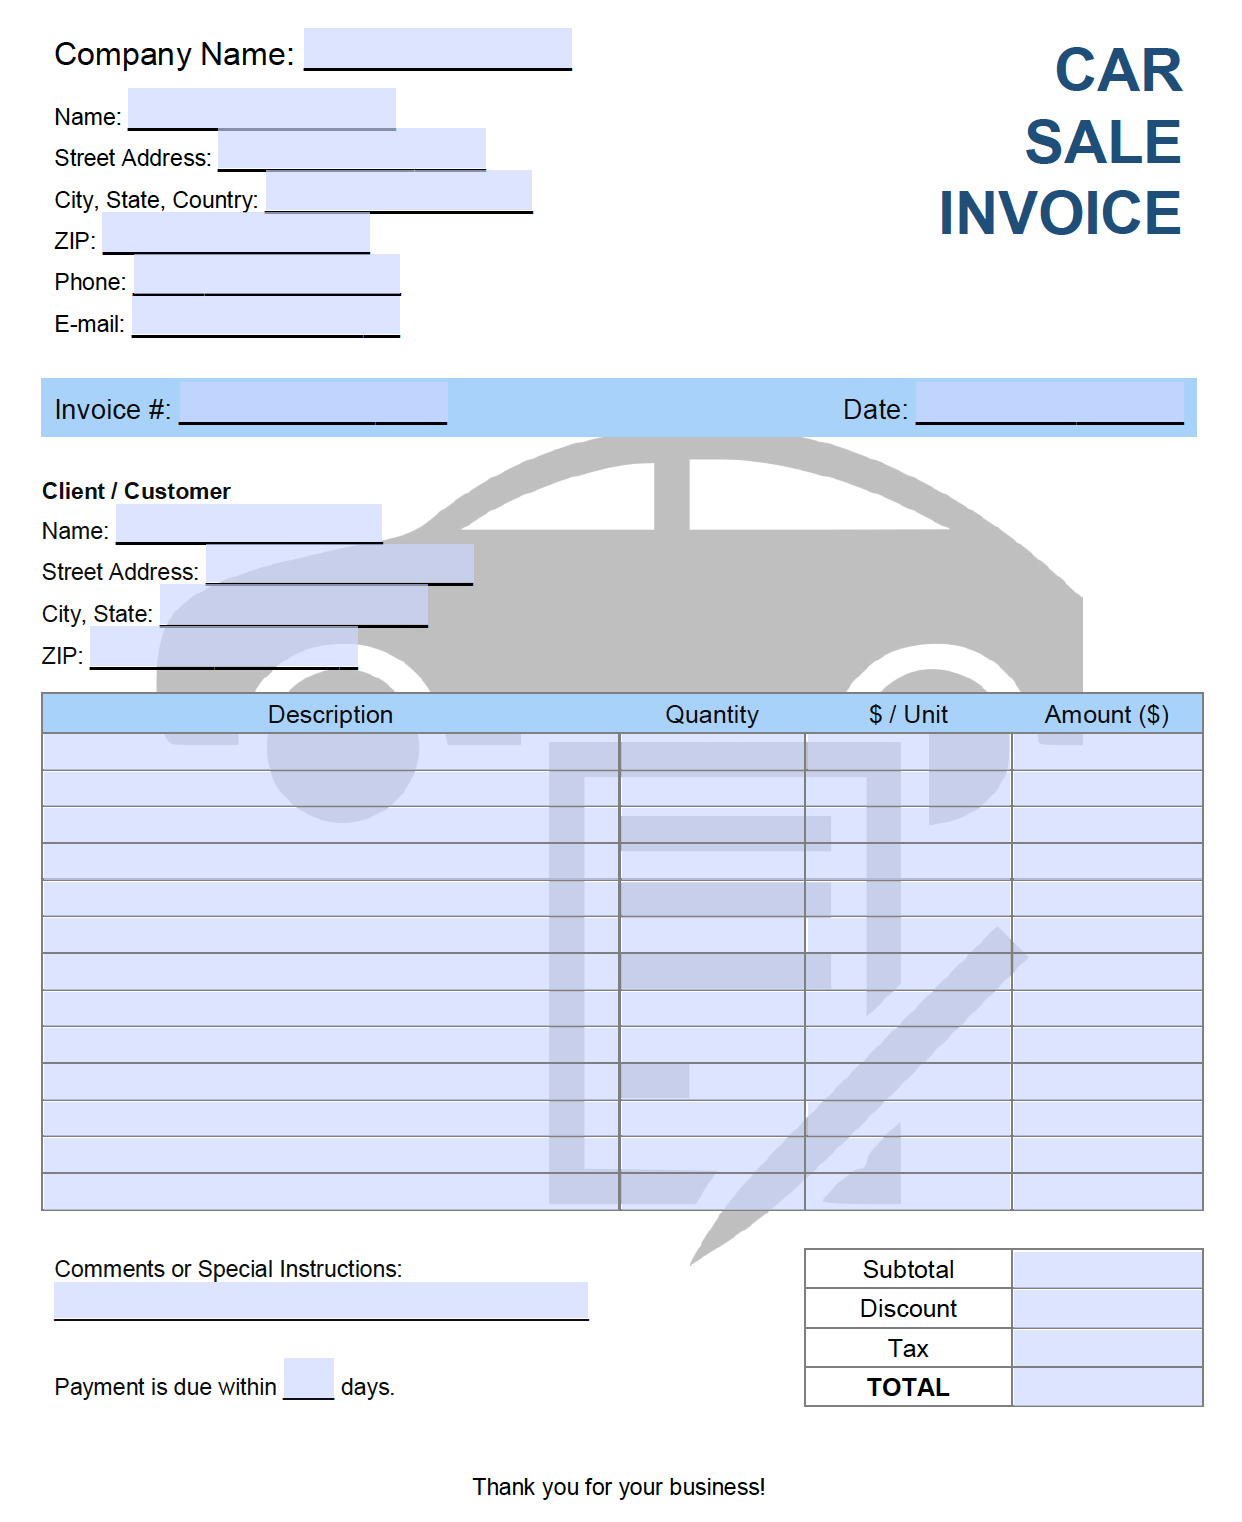 Free Car Sales Invoice Template  PDF  WORD  EXCEL In Car Sales Invoice Template Free Download